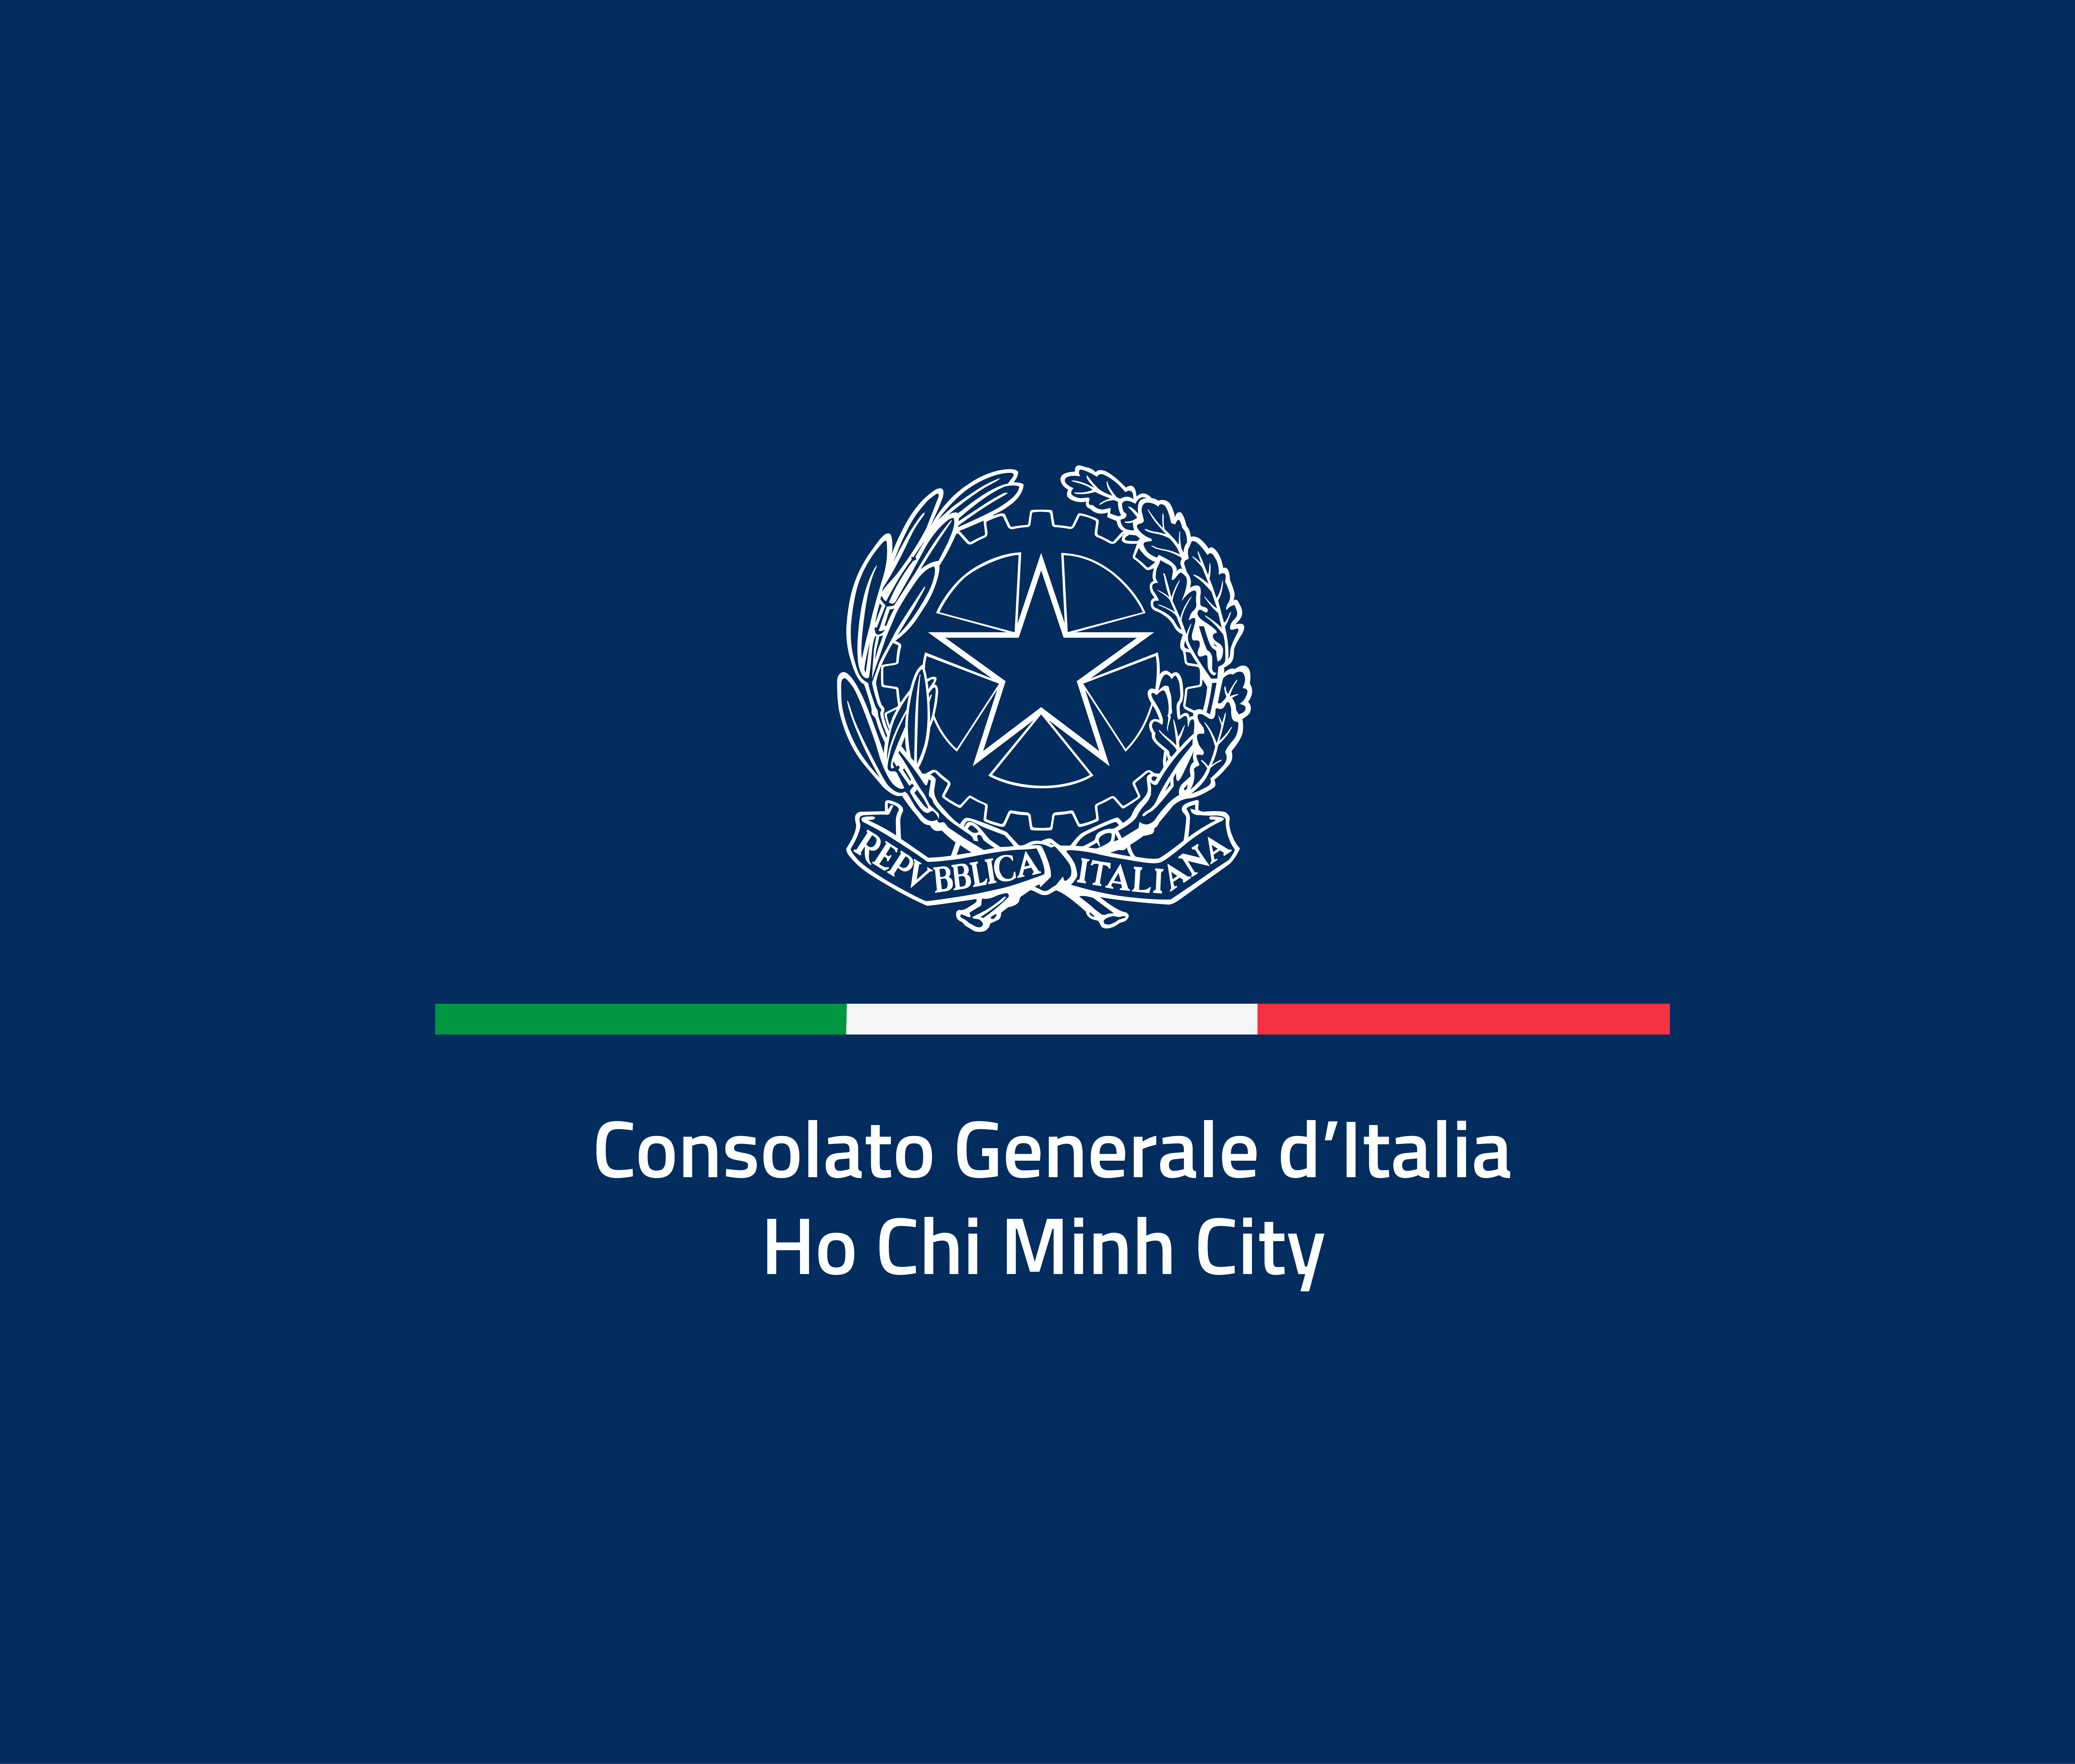 Consulate General of Italy Ho Chi Minh City